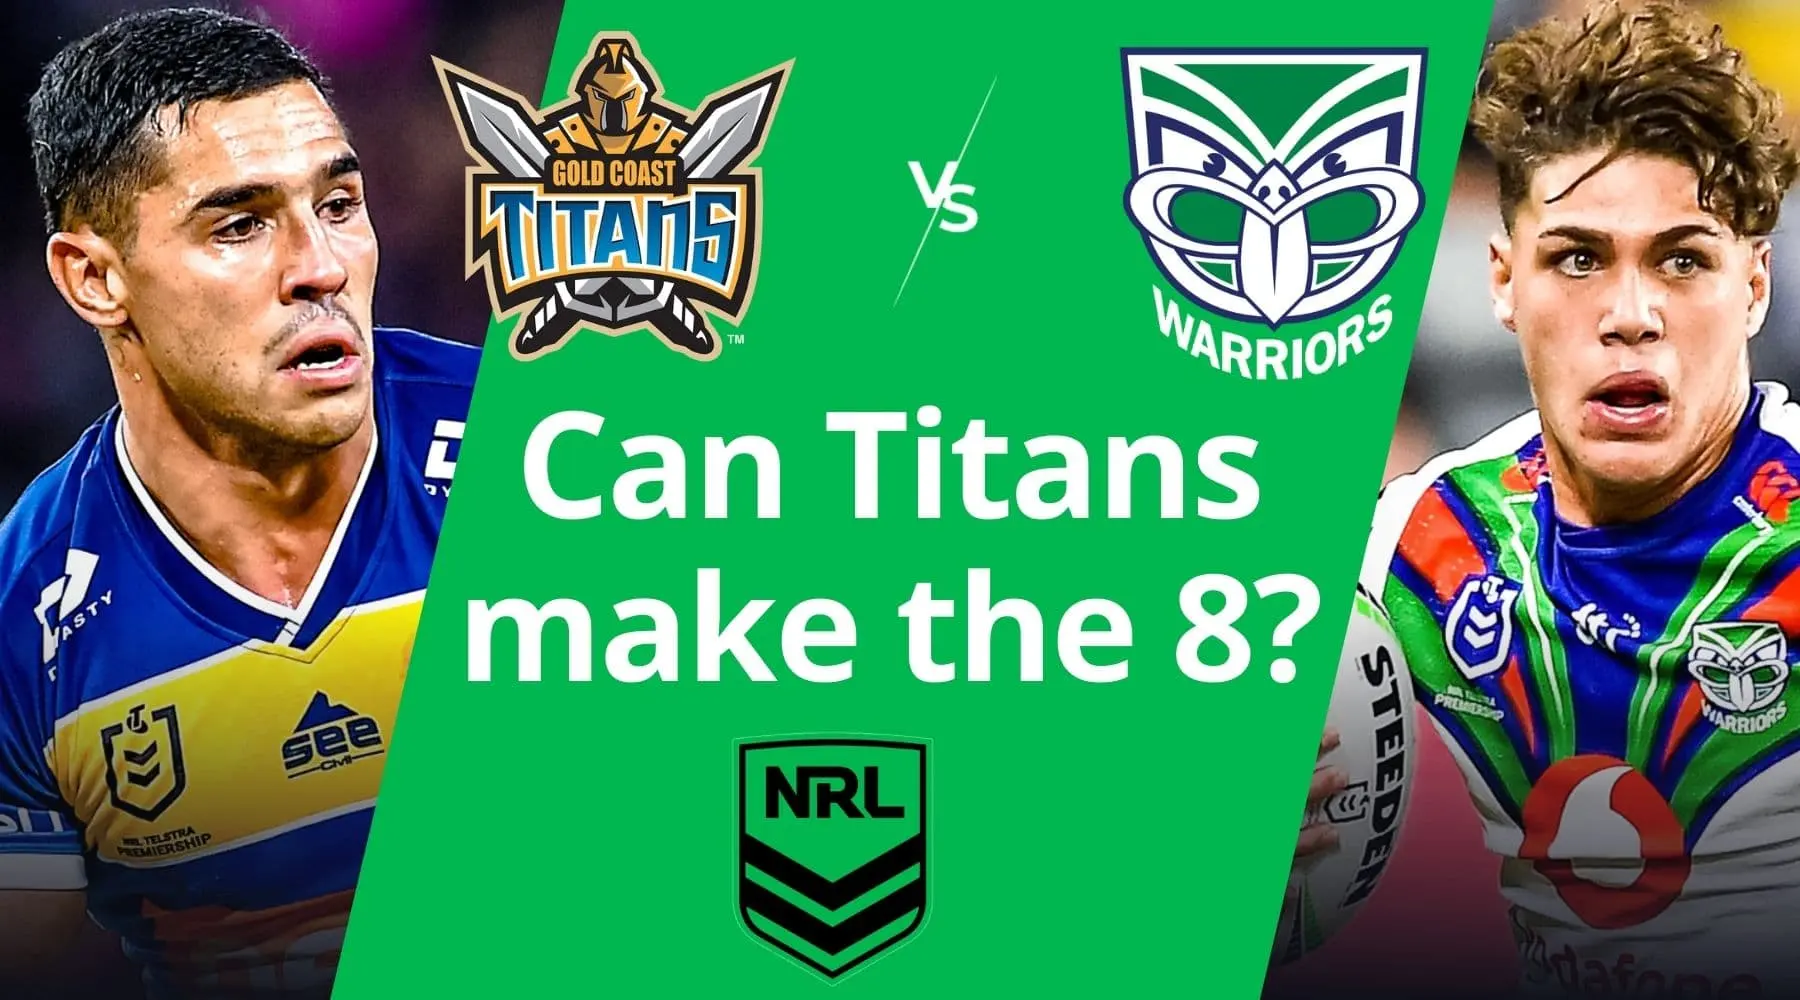 Titans-Warriors NRL trial abandoned